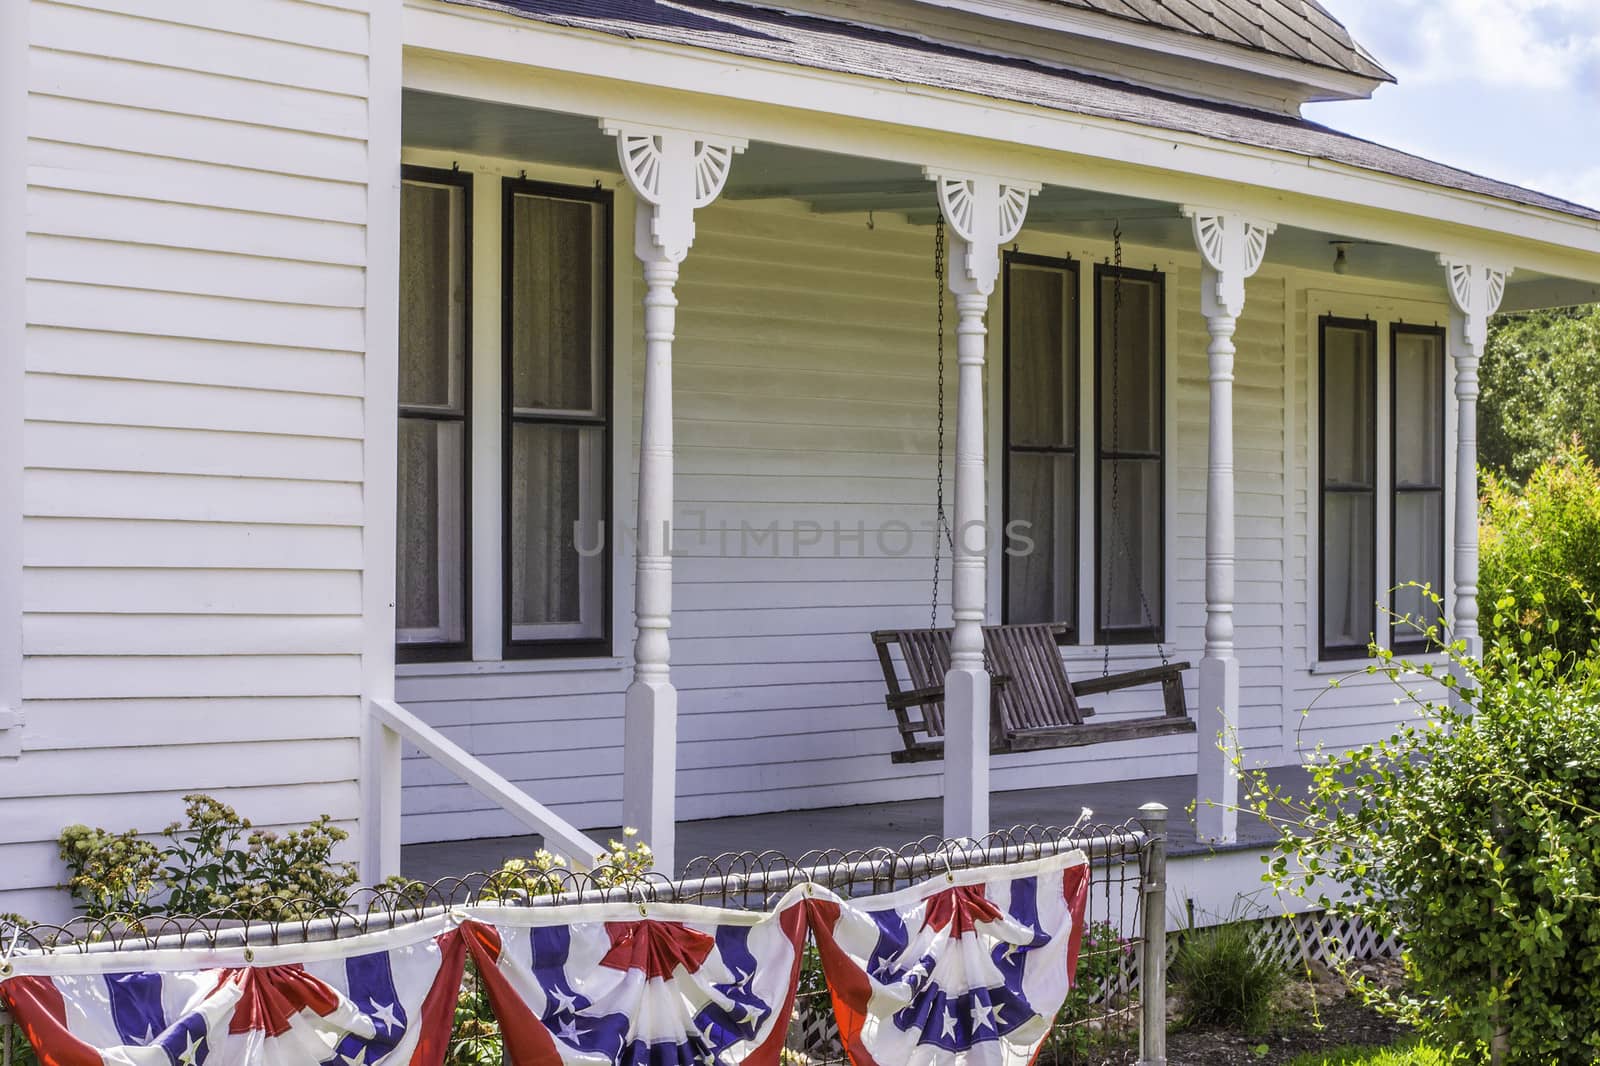 A side view of the front porch of a vintage style wooden home.